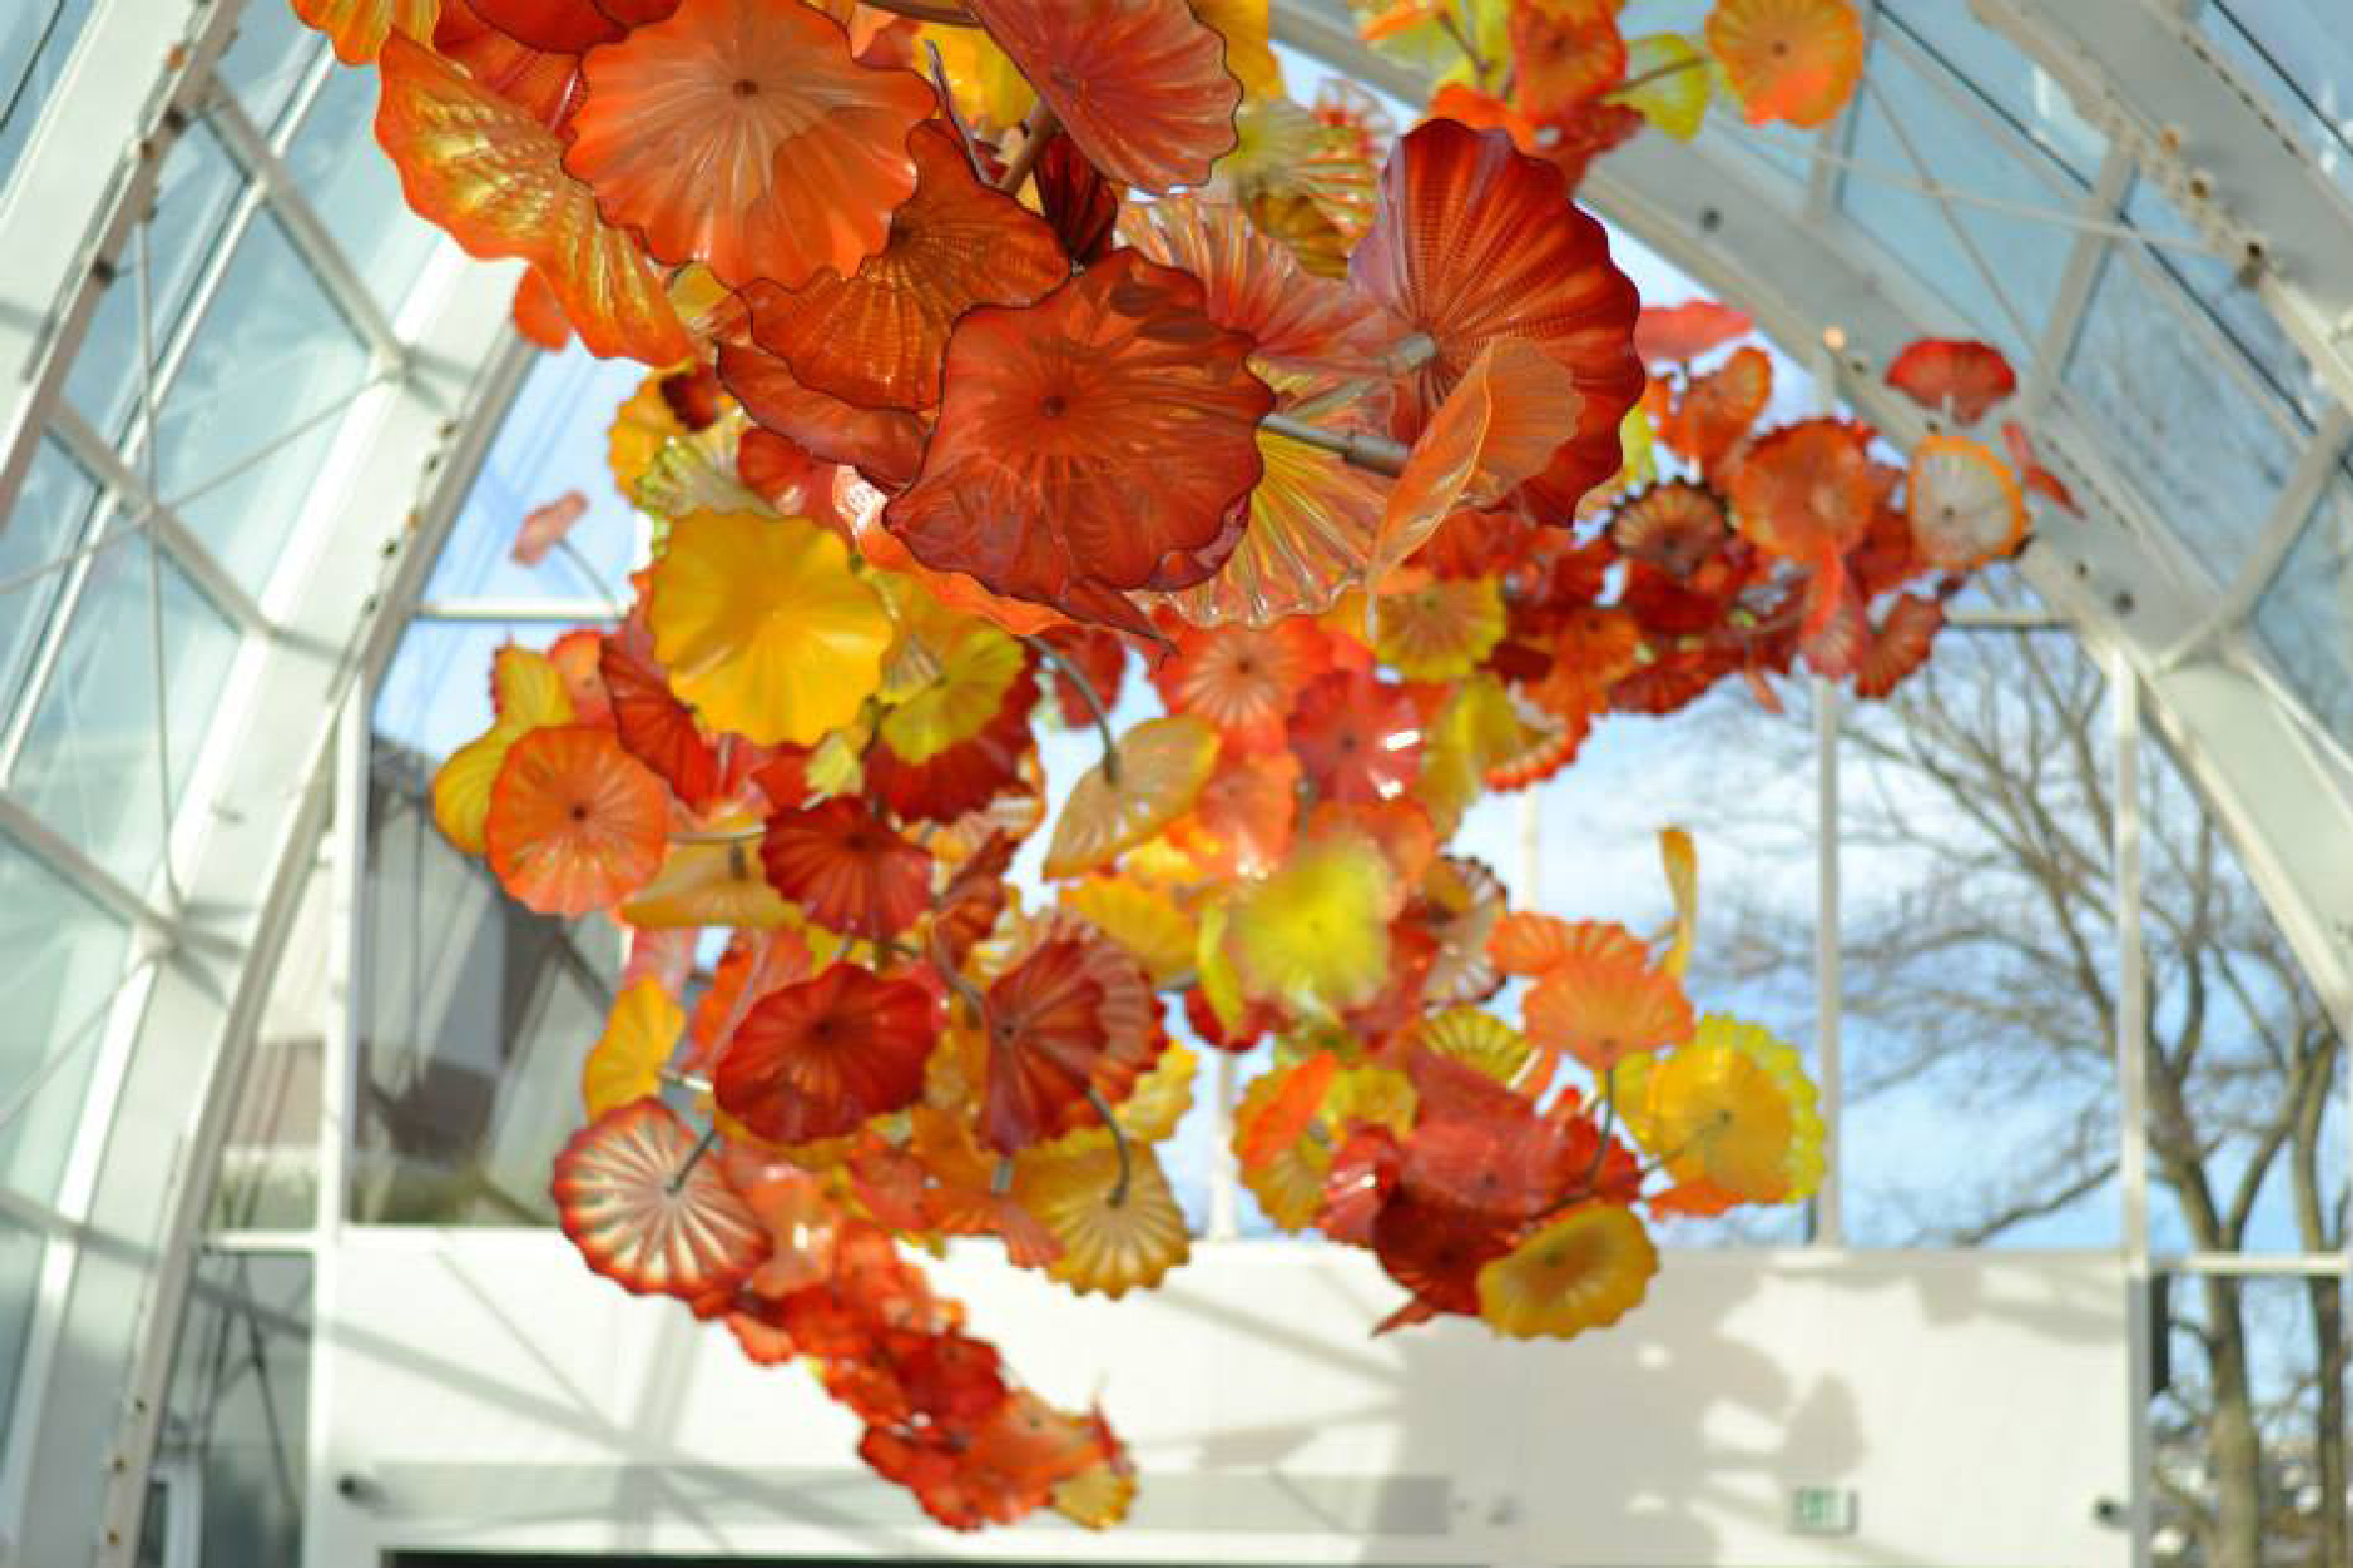 Chihuly Garden of Glass